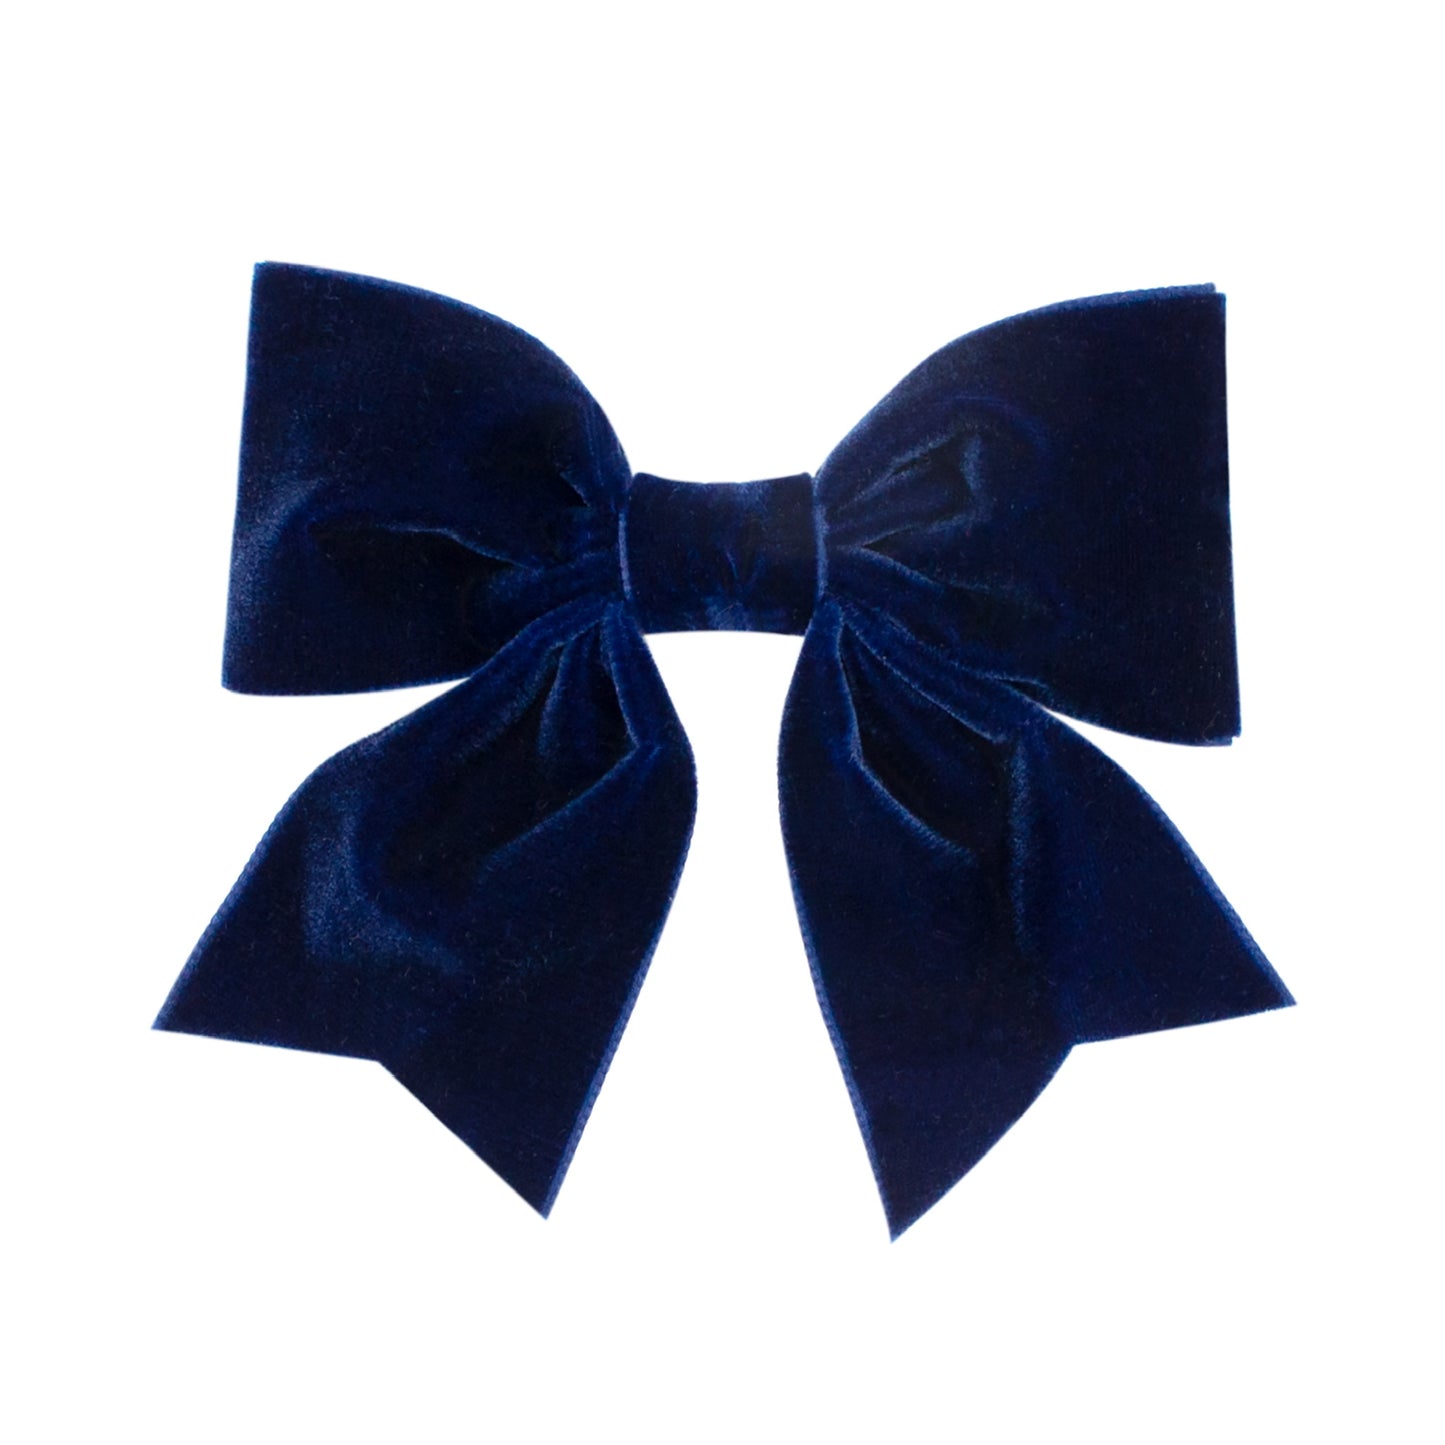 Velvet Bow tie with Fancy Tails